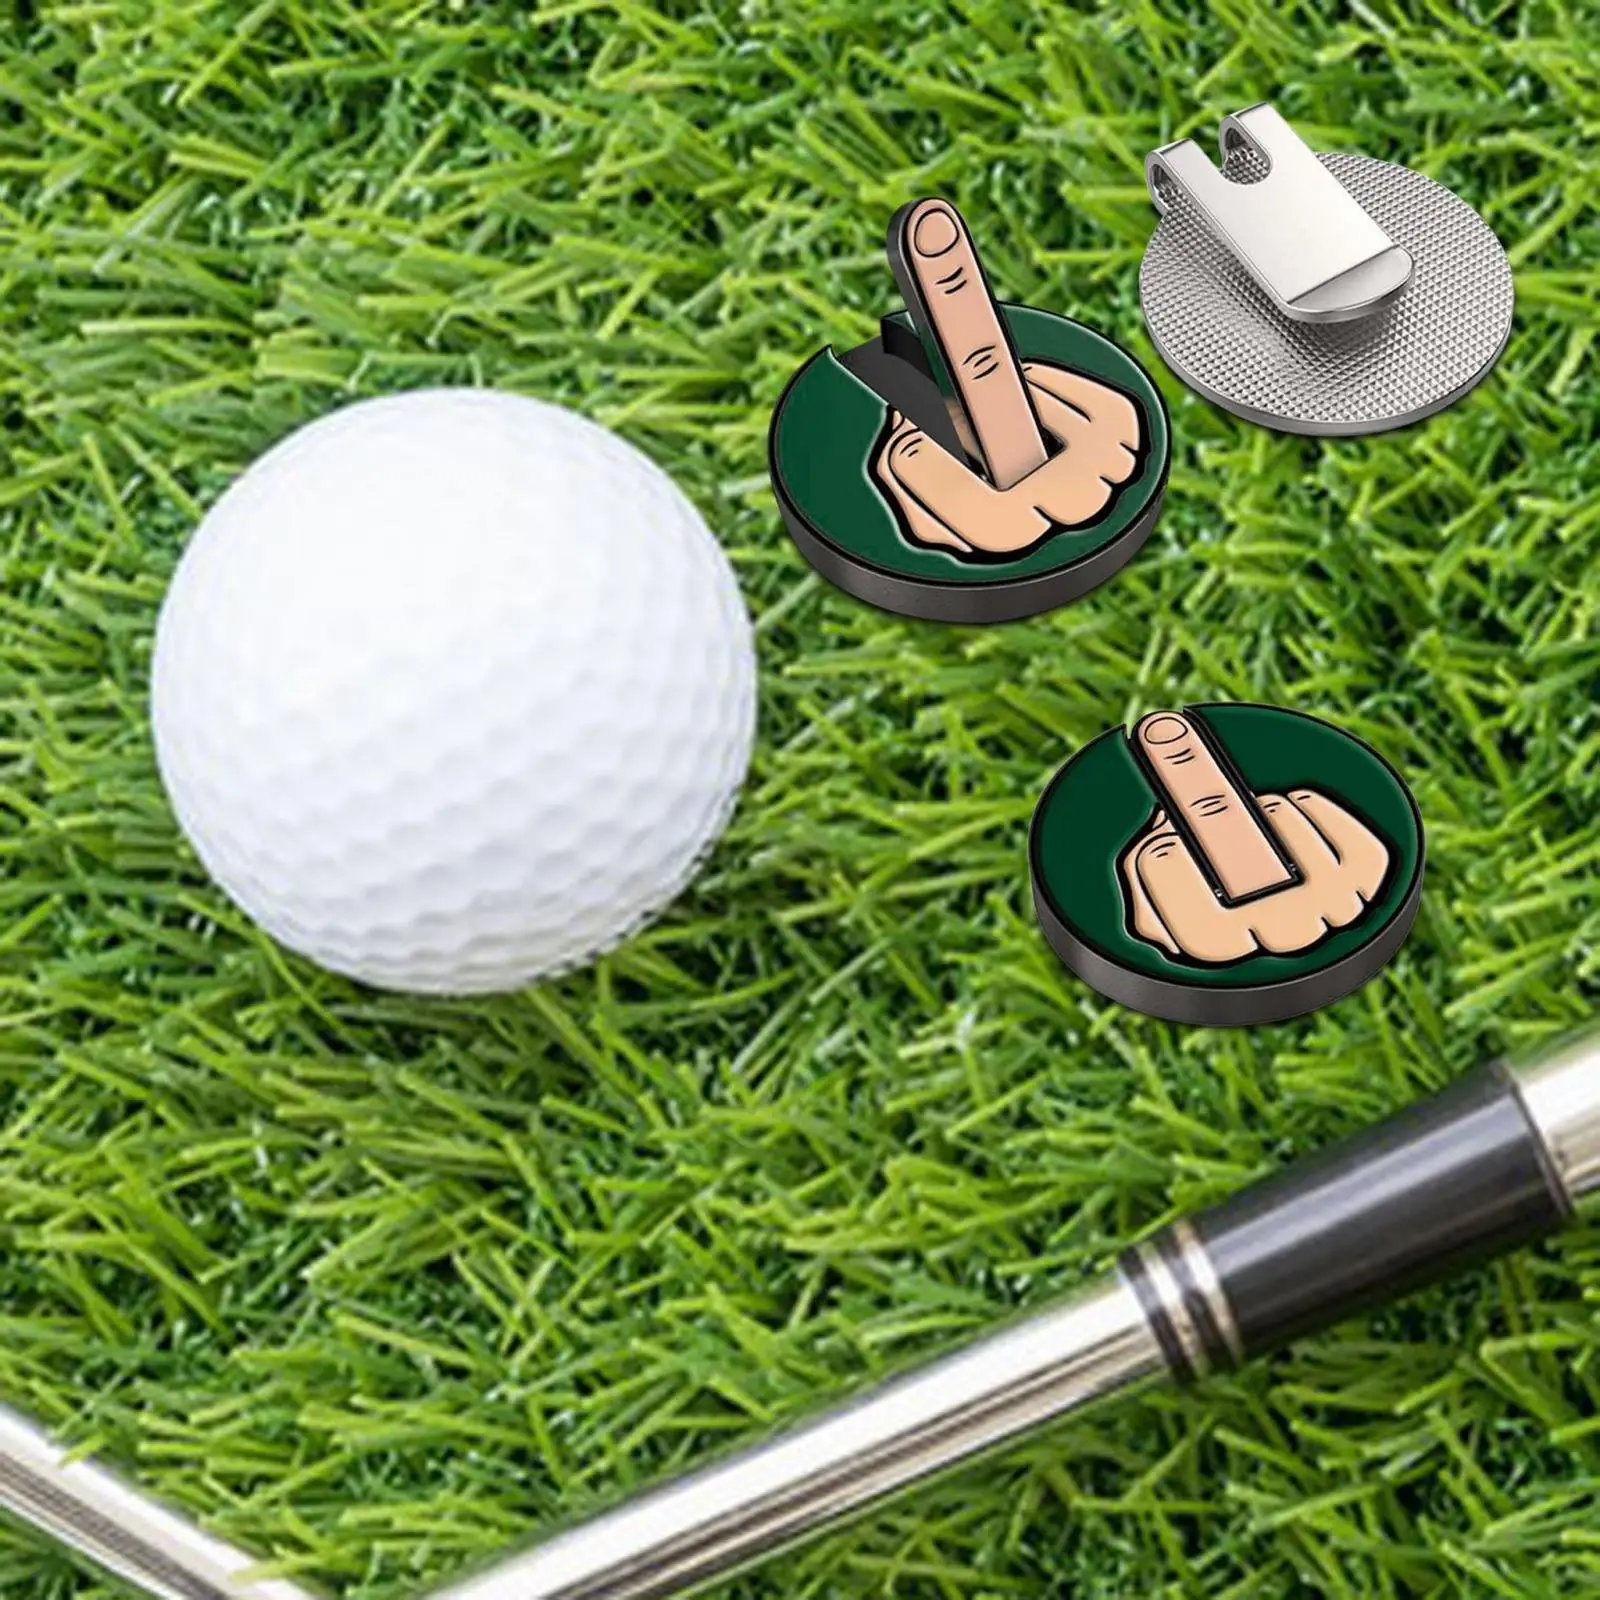 Funny Middle Finger Theme Golf Ball Marker Golf Accessories, Diameter 2.5cm